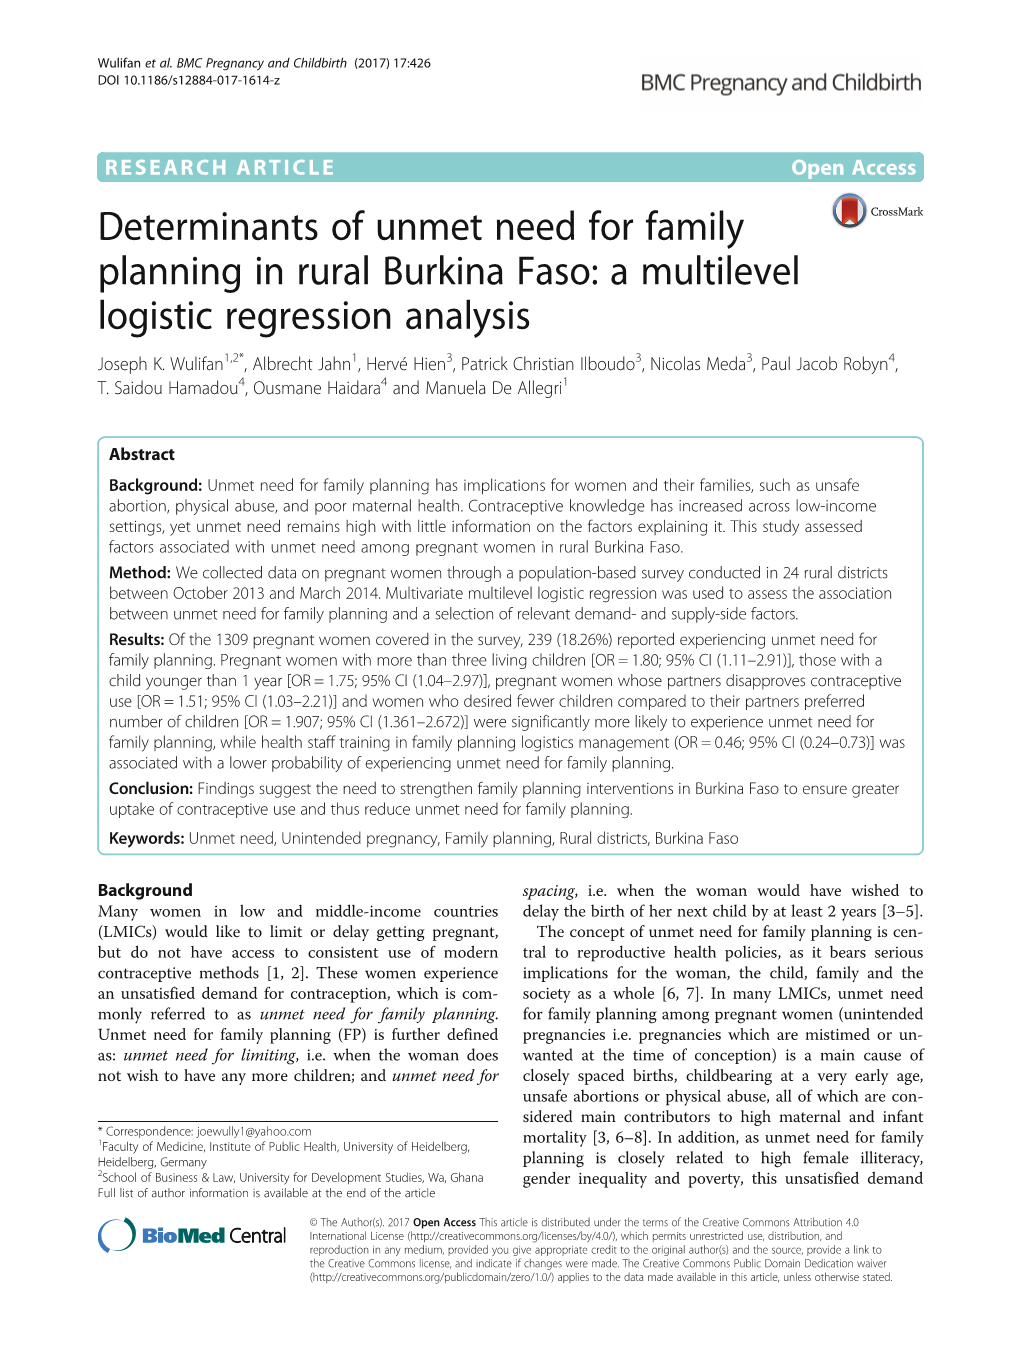 Determinants of Unmet Need for Family Planning in Rural Burkina Faso: a Multilevel Logistic Regression Analysis Joseph K